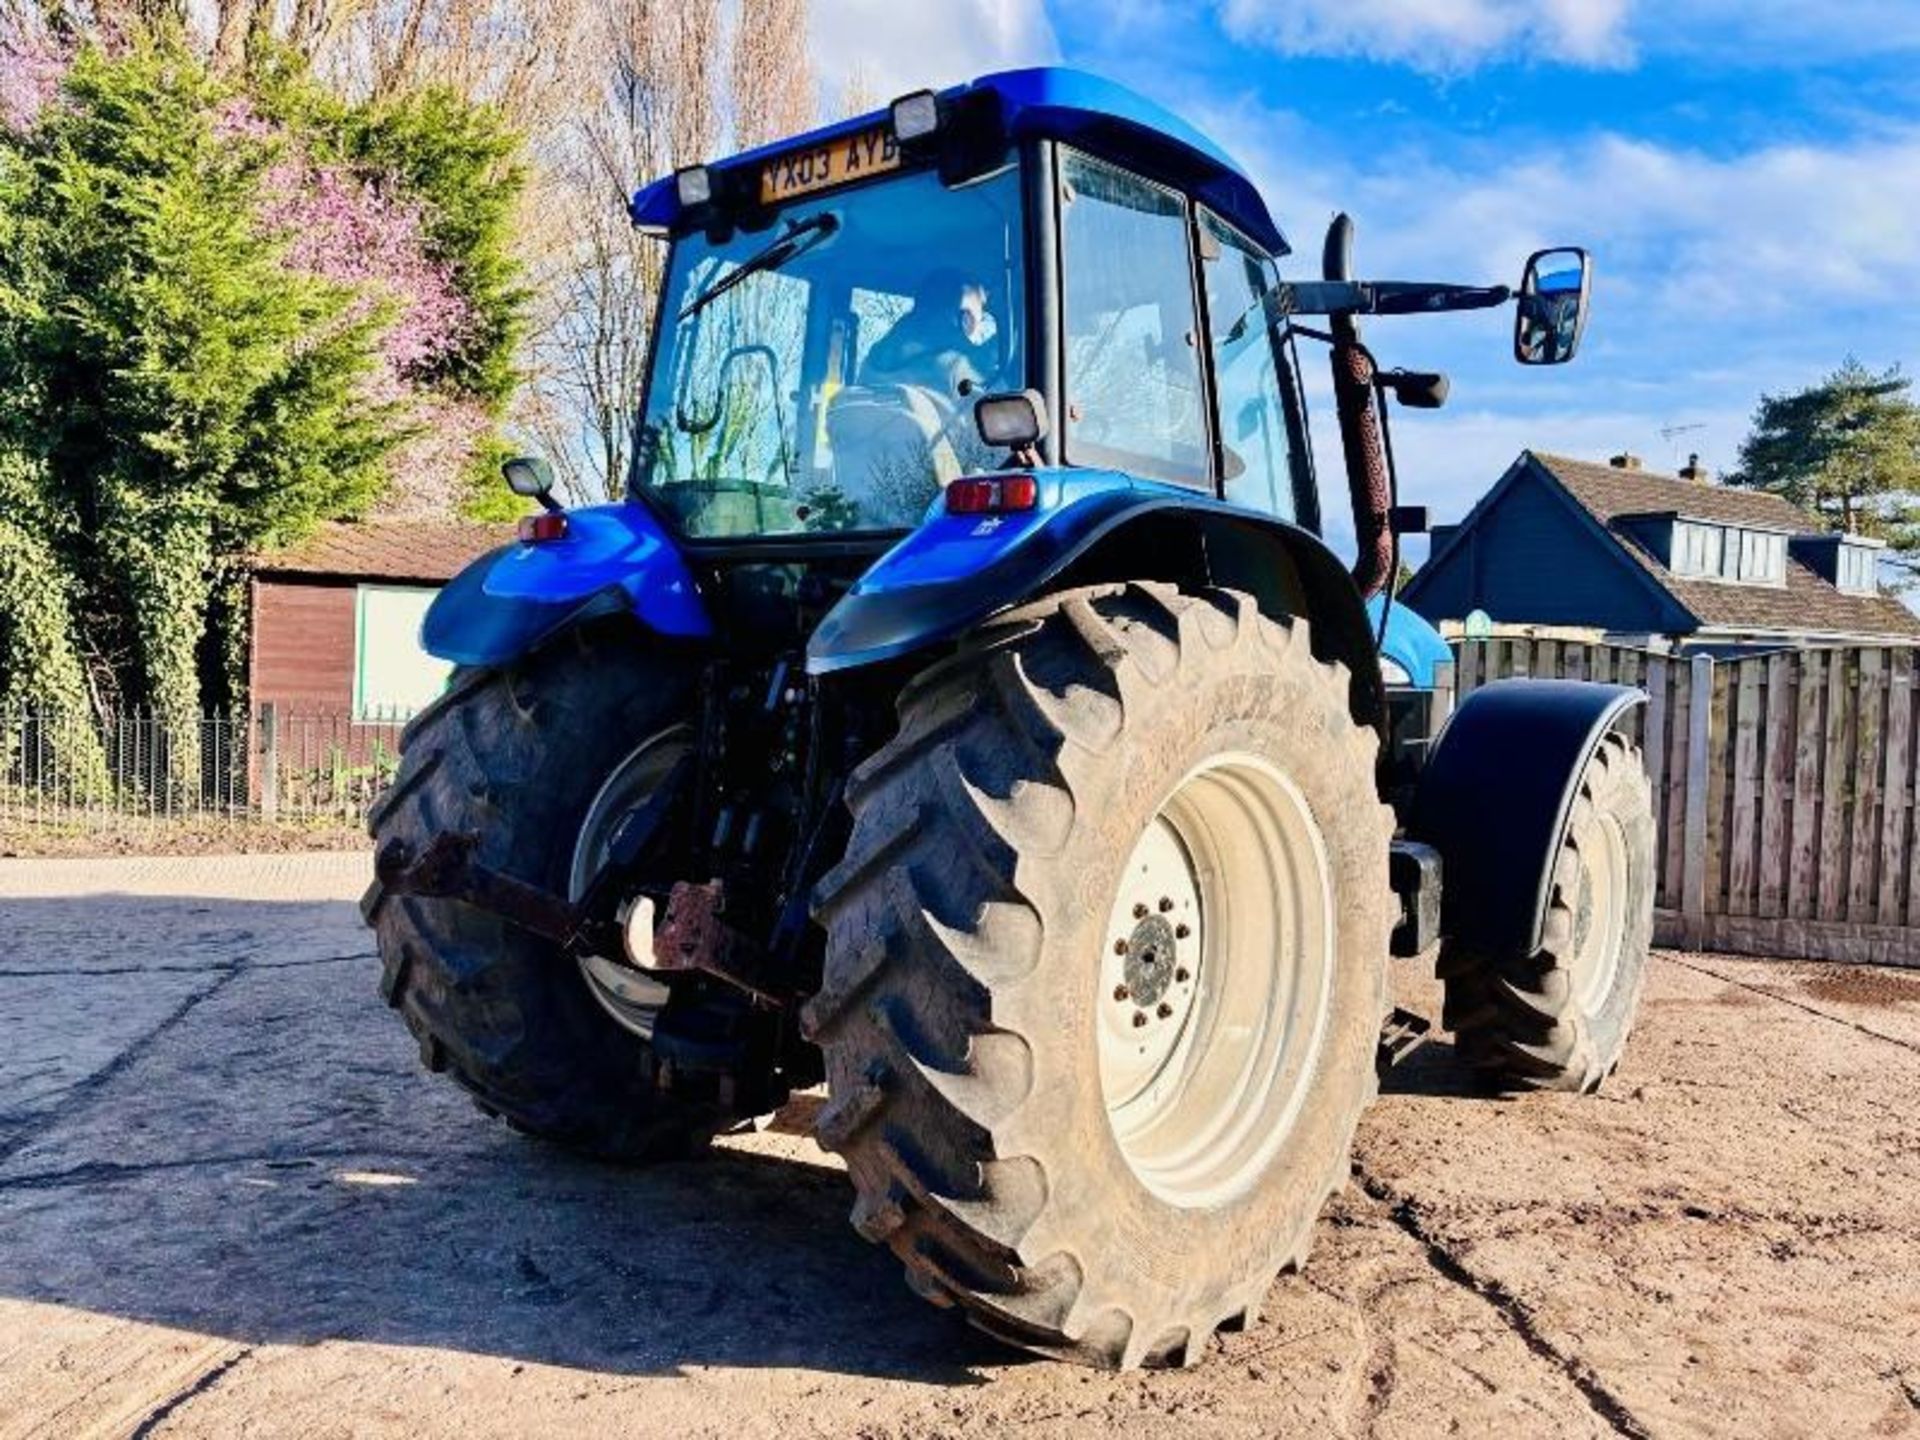 NEW HOLLAND TM155 4WD TRACTOR *5619 HOURS* C/W RANGE COMMAND GEAR BOX - Image 17 of 19